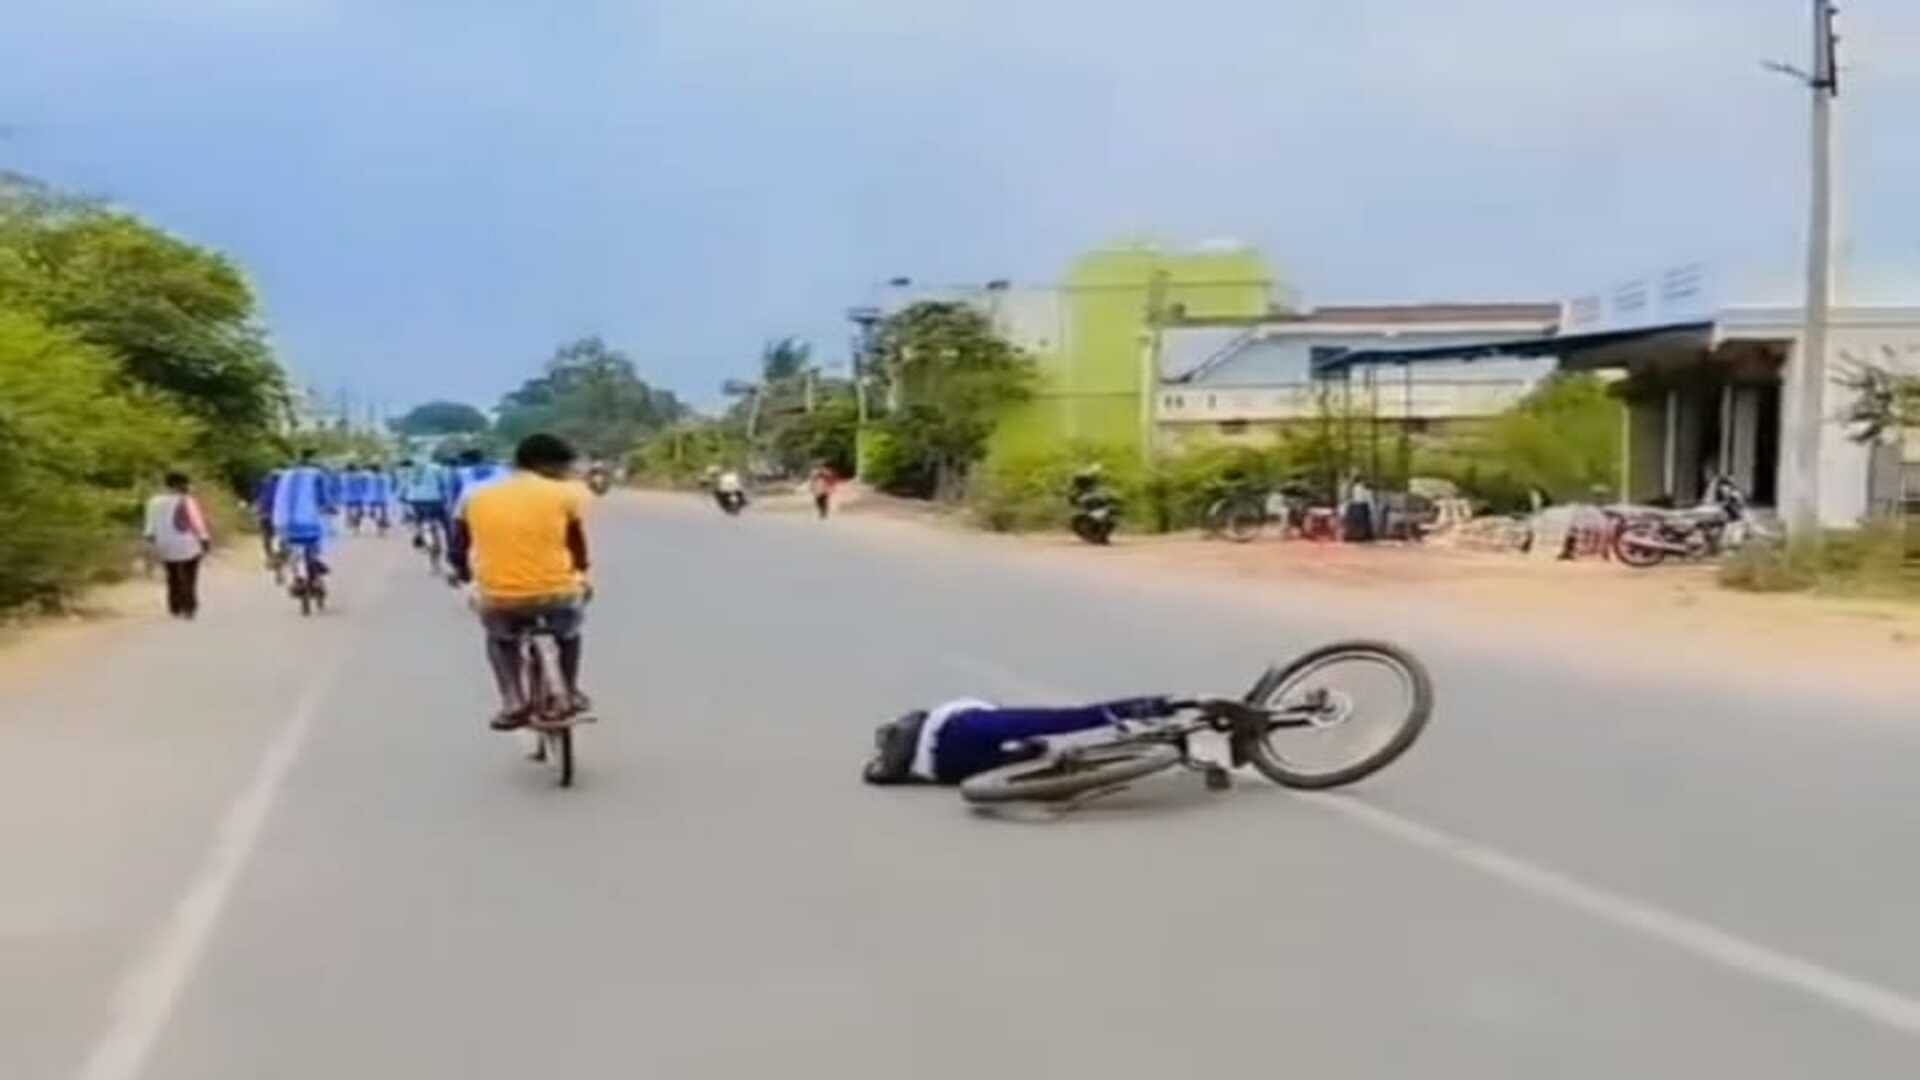 A boy fell down on the road while doing stunts with bicycle watch this viral video